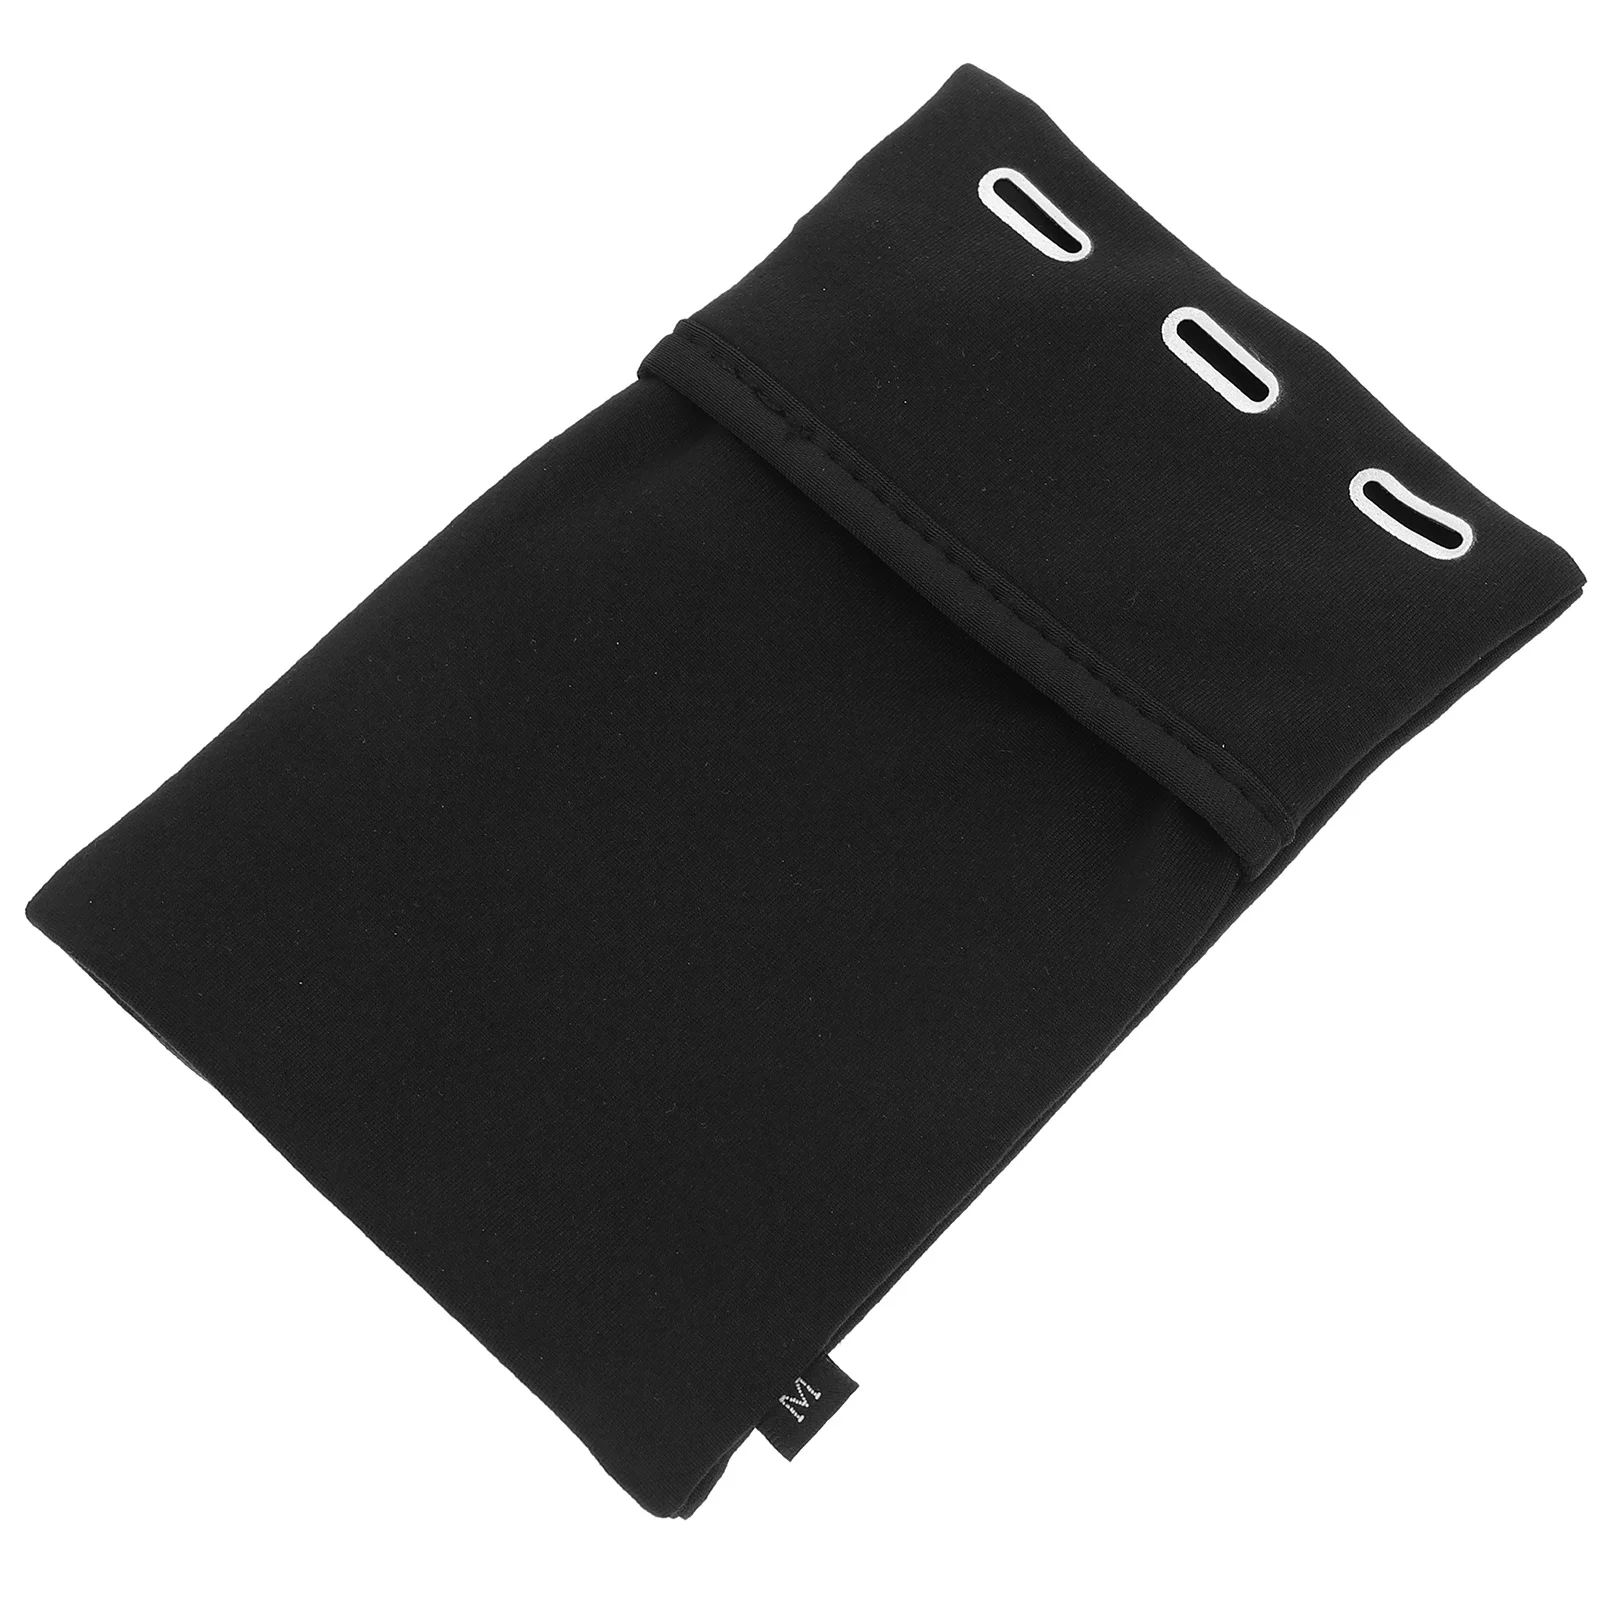 

Holder Armband Arm Cell Running Strap Wrist Workout Bands Pouch Sports Jogging Case Mobile Armbands Forearm Sleeve Walking Band